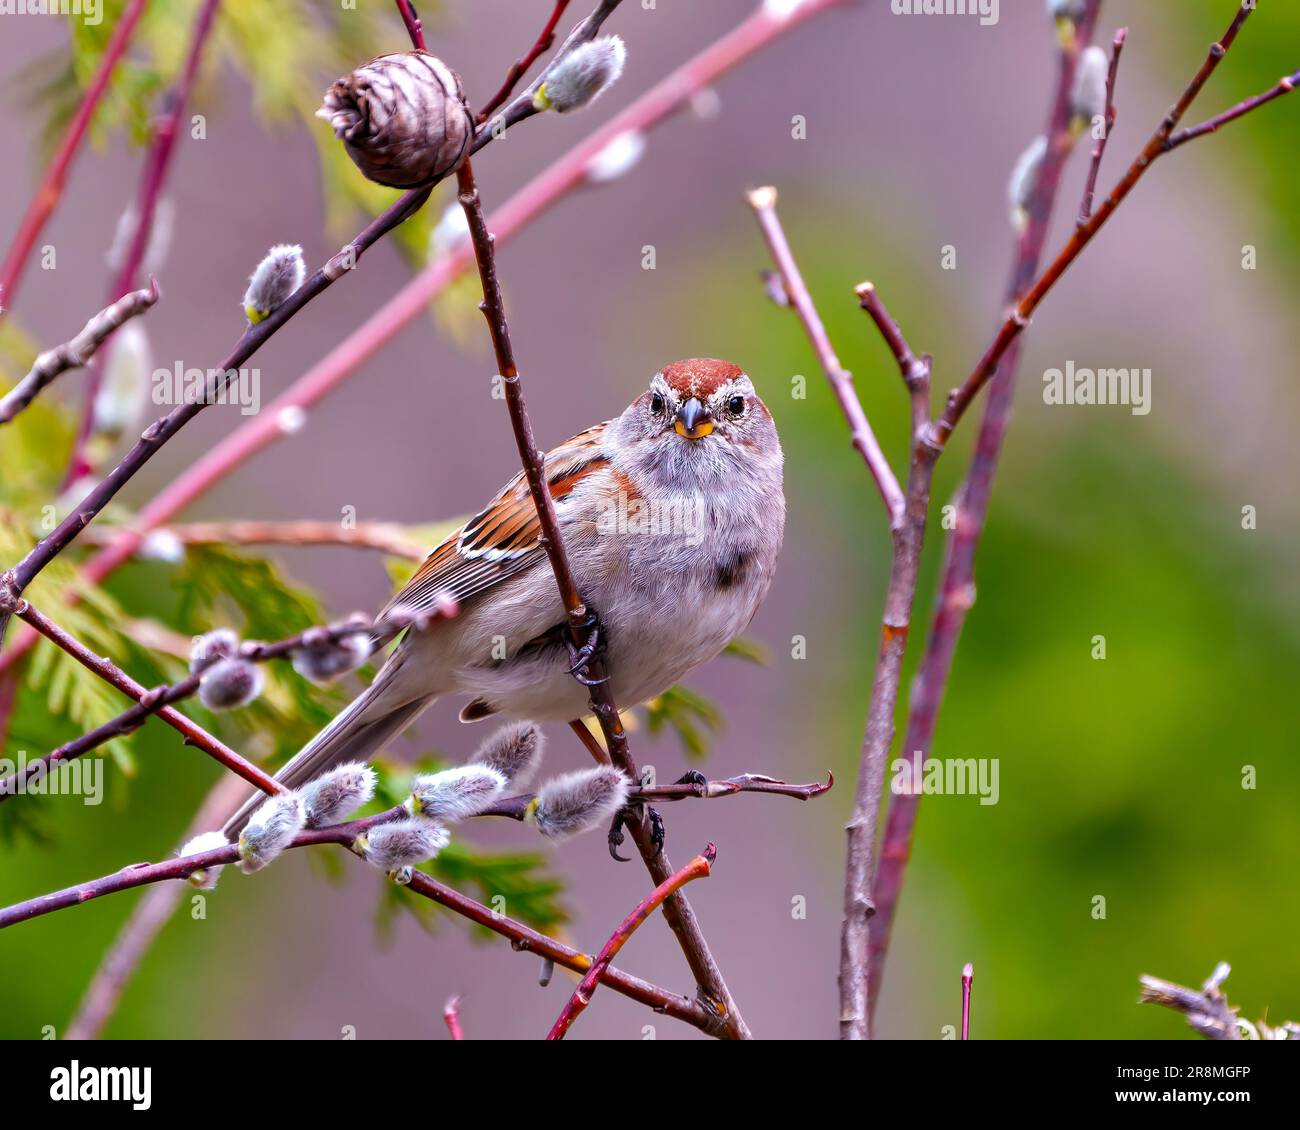 American Tree Sparrow close-up side view perched on a tree bud branch and looking at camera with green  background in its environment and habitat. Stock Photo